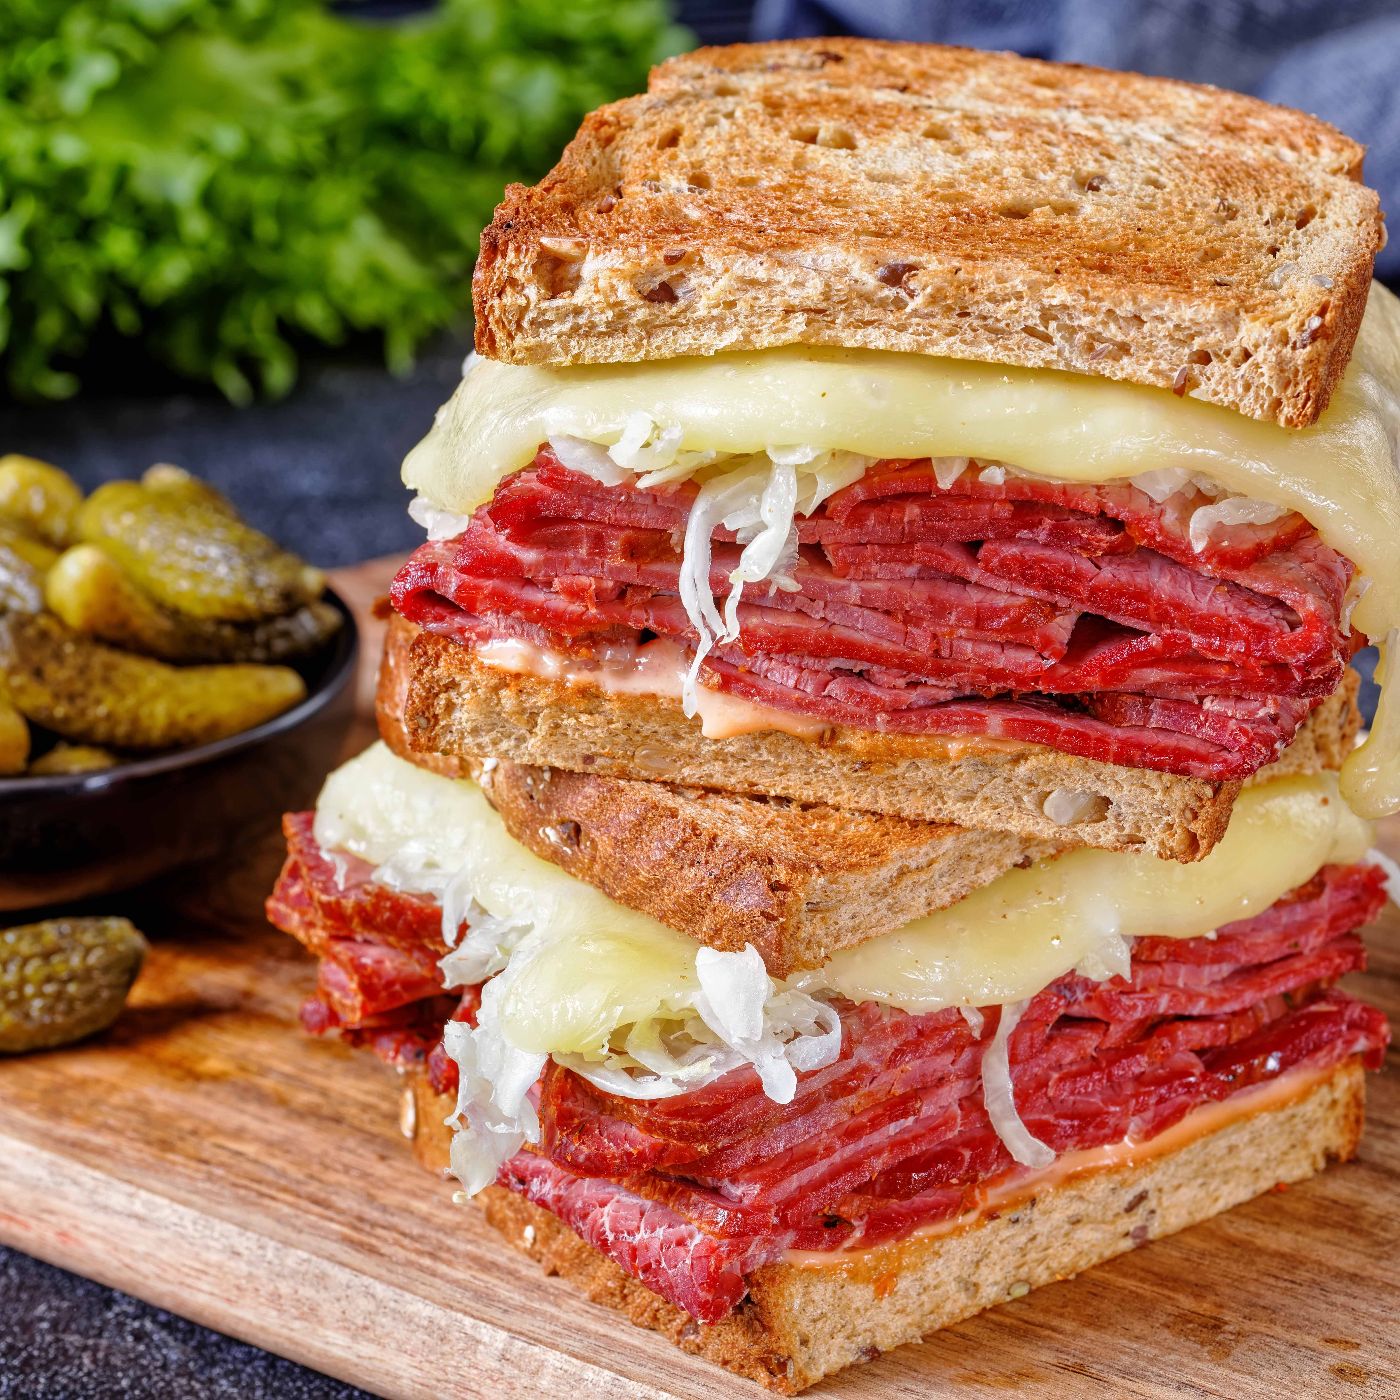 reuben-sandwich-with-corned-beef-top-view-1393175182_8660x5773_square.jpg